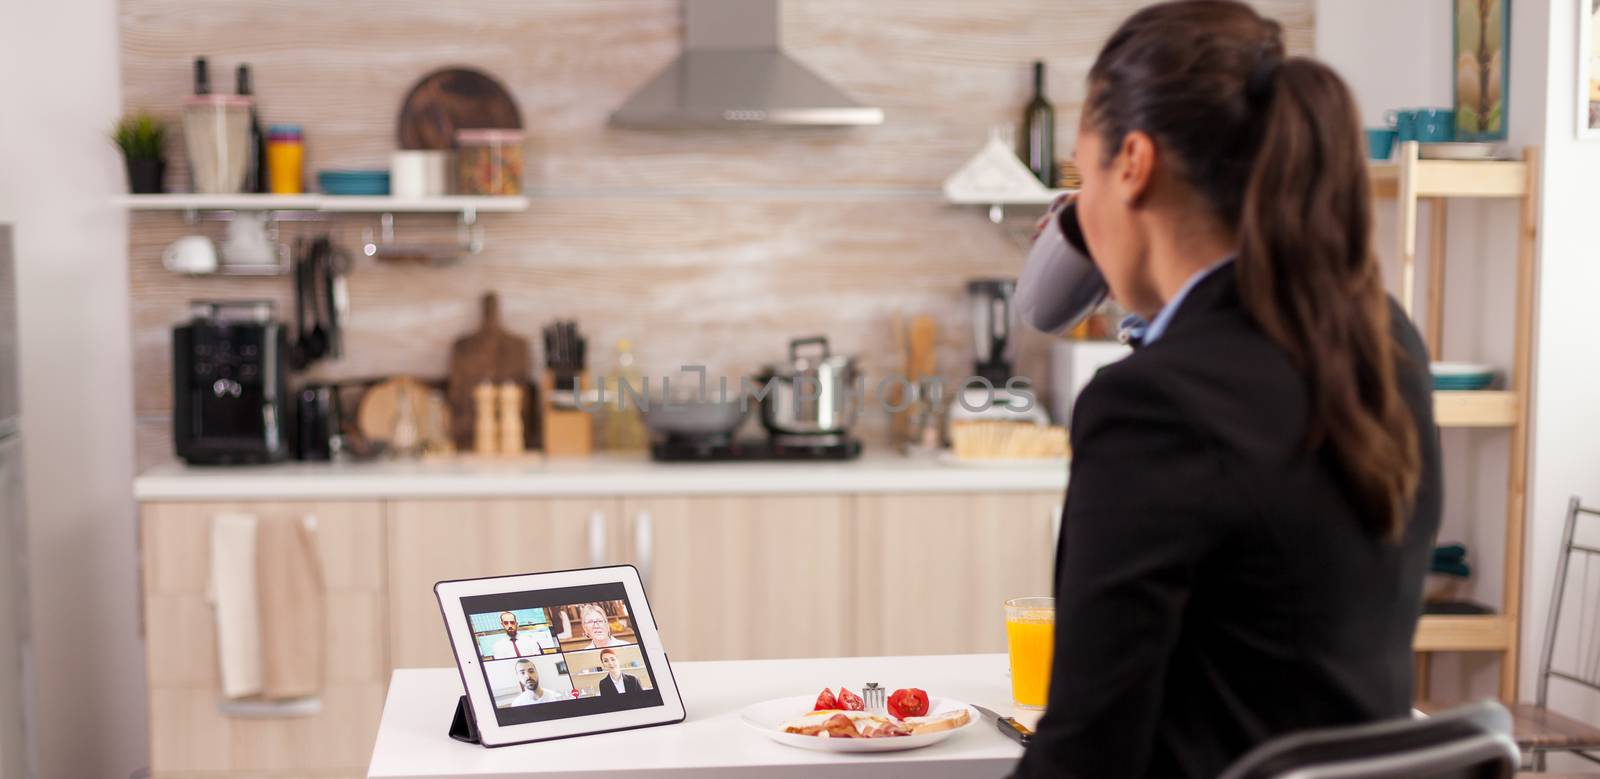 Video conference in kitchen by DCStudio